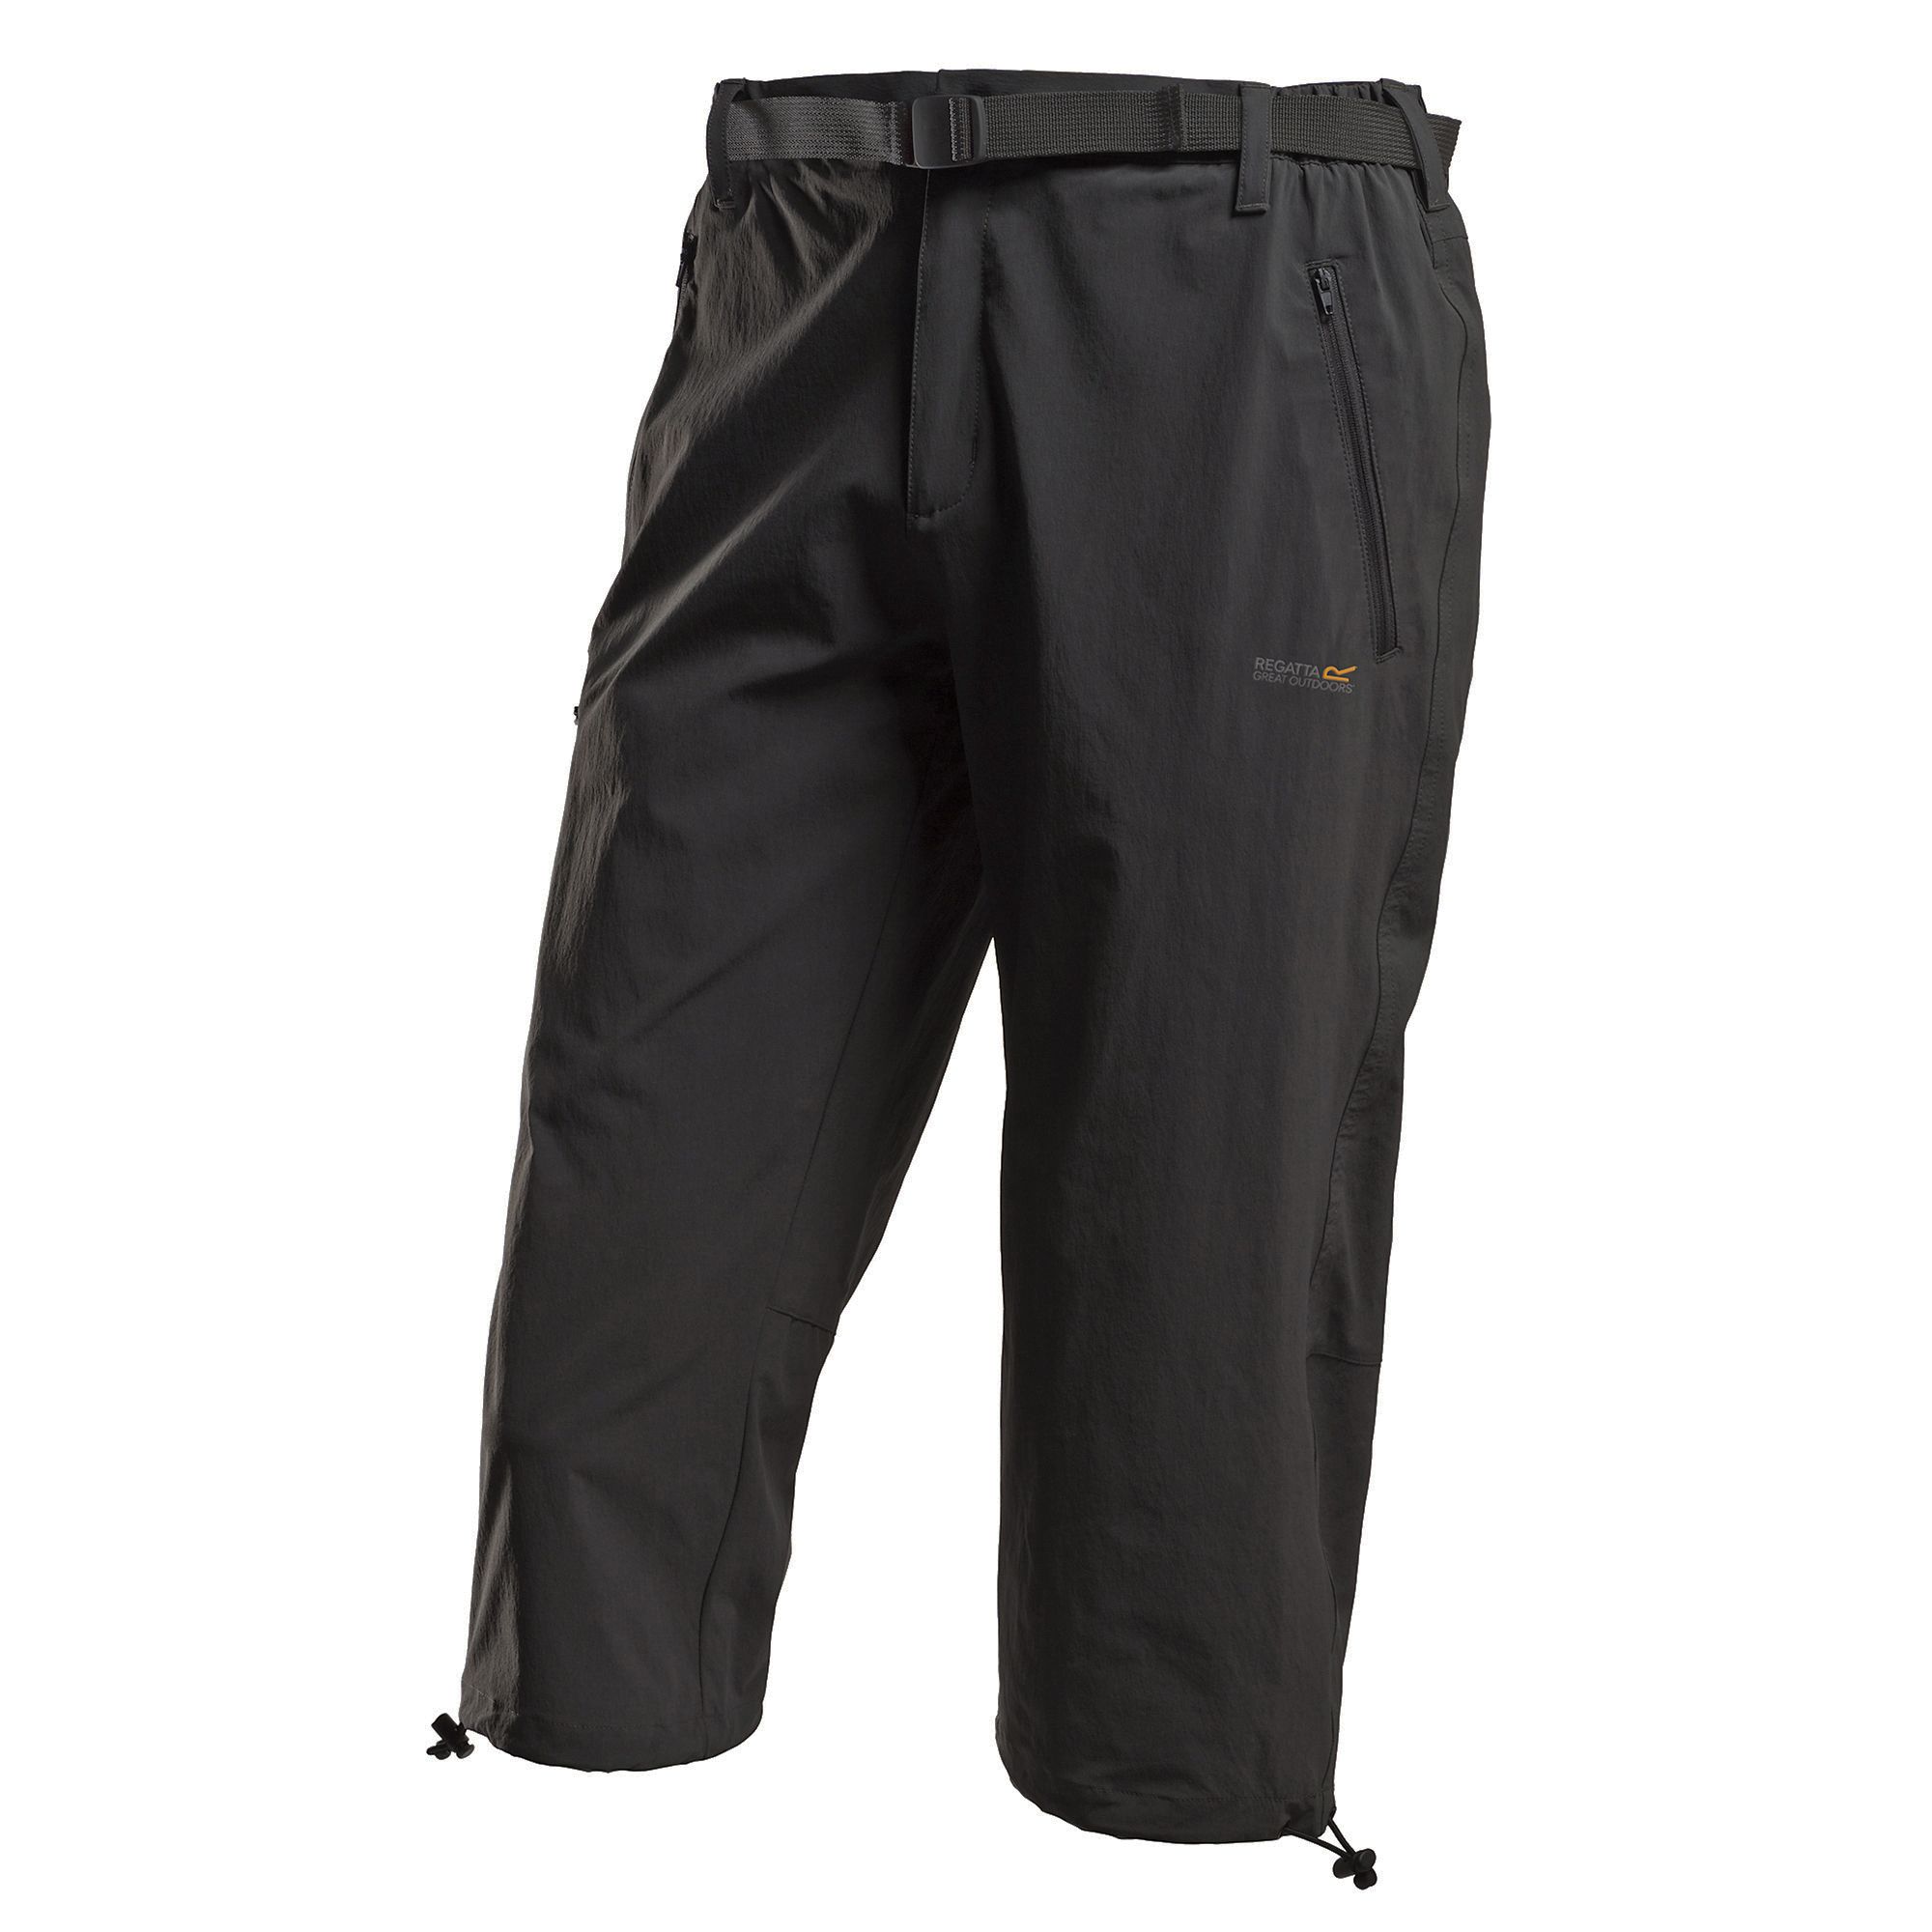 Mens 3/4 trousers. ISOFLEX active stretch fabric. 4 way stretch for increased movement and comfort. Durable water repellent finish. Quick dry for enhanced comfort. Lightweight. Precision fit. Part elasticated waist with webbing belt. Multi-pocketed - front and rear zipped pockets. Engineered and intelligent ergonomic fit. Drawcord at hem. Regatta Mens sizing (waist approx): 26in/66cm, 28in/71cm, 30in/76cm, 32in/81cm, 33in/84cm, 34in/86.5cm, 36in/91.5cm, 38in/96.5cm, 40in/101.5cm, 42in/106.5cm, 44in/111.5cm, 46in/117cm, 48in/122cm, 50in/127cm. 85% Polyamide, 15% Elastane.